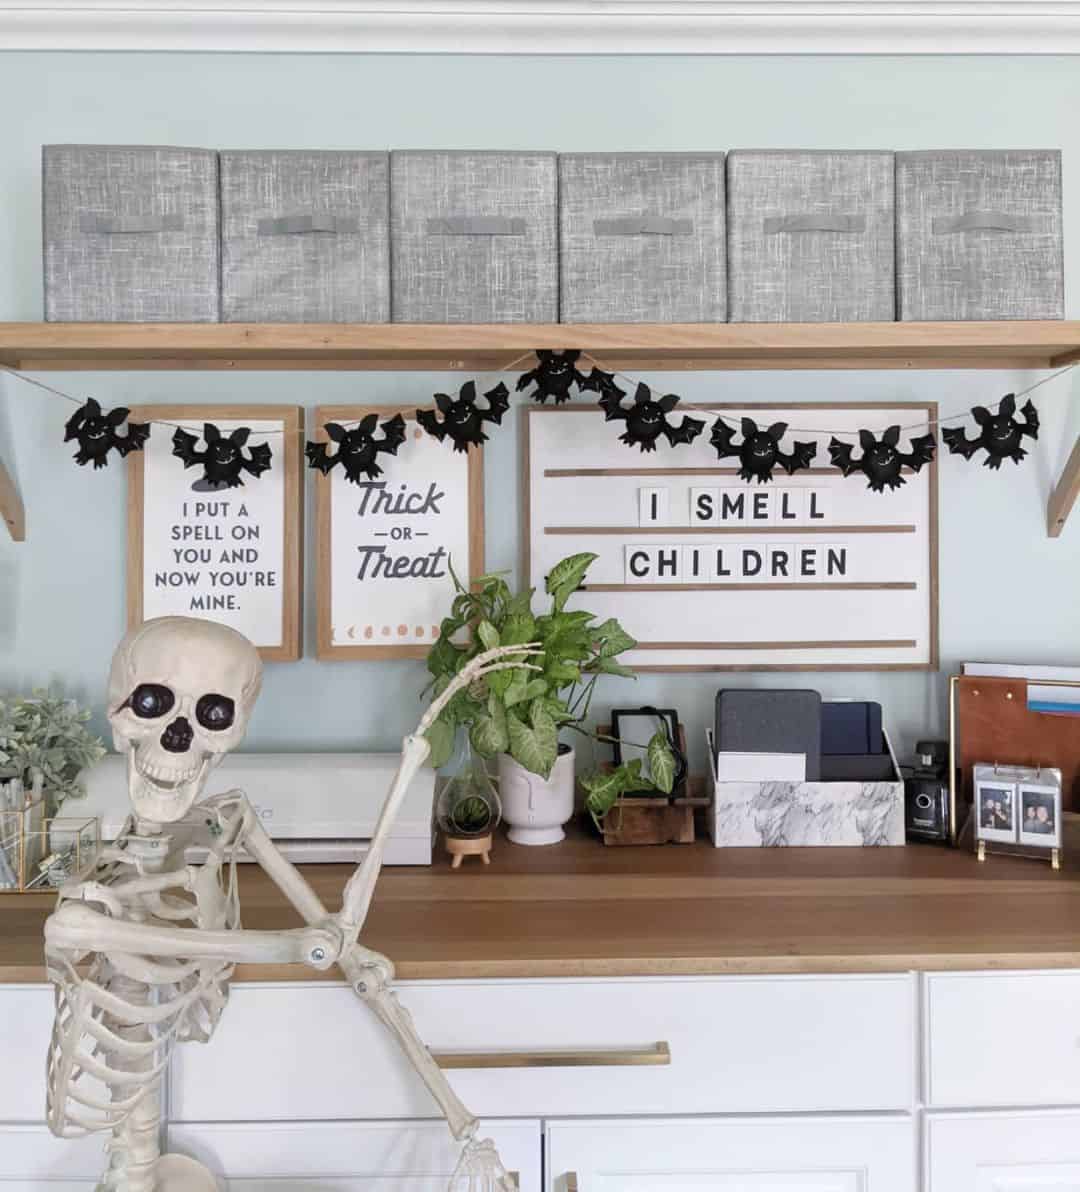 Where Work Meets Whimsy: A Bewitched Home Space - Soul & Lane